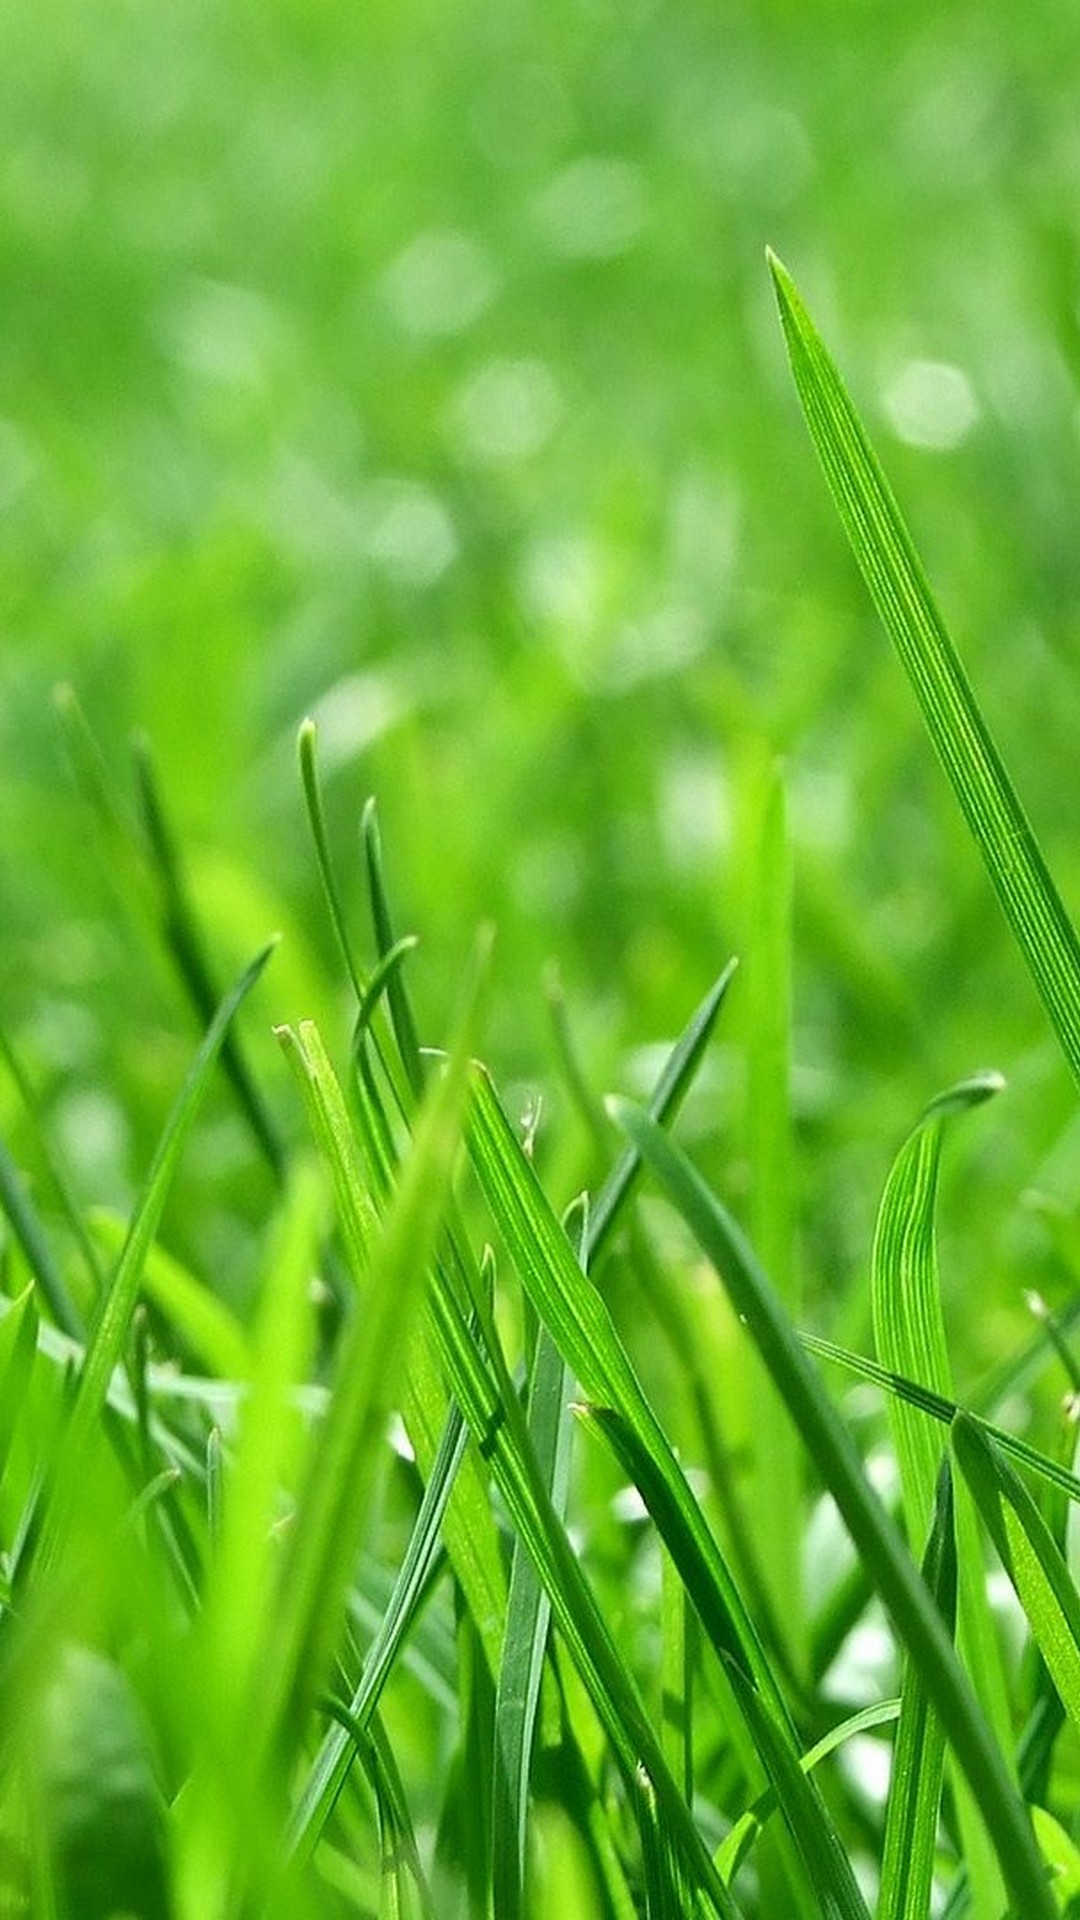 Android Wallpaper Nature Green with image resolution 1080x1920 pixel. You can make this wallpaper for your Android backgrounds, Tablet, Smartphones Screensavers and Mobile Phone Lock Screen